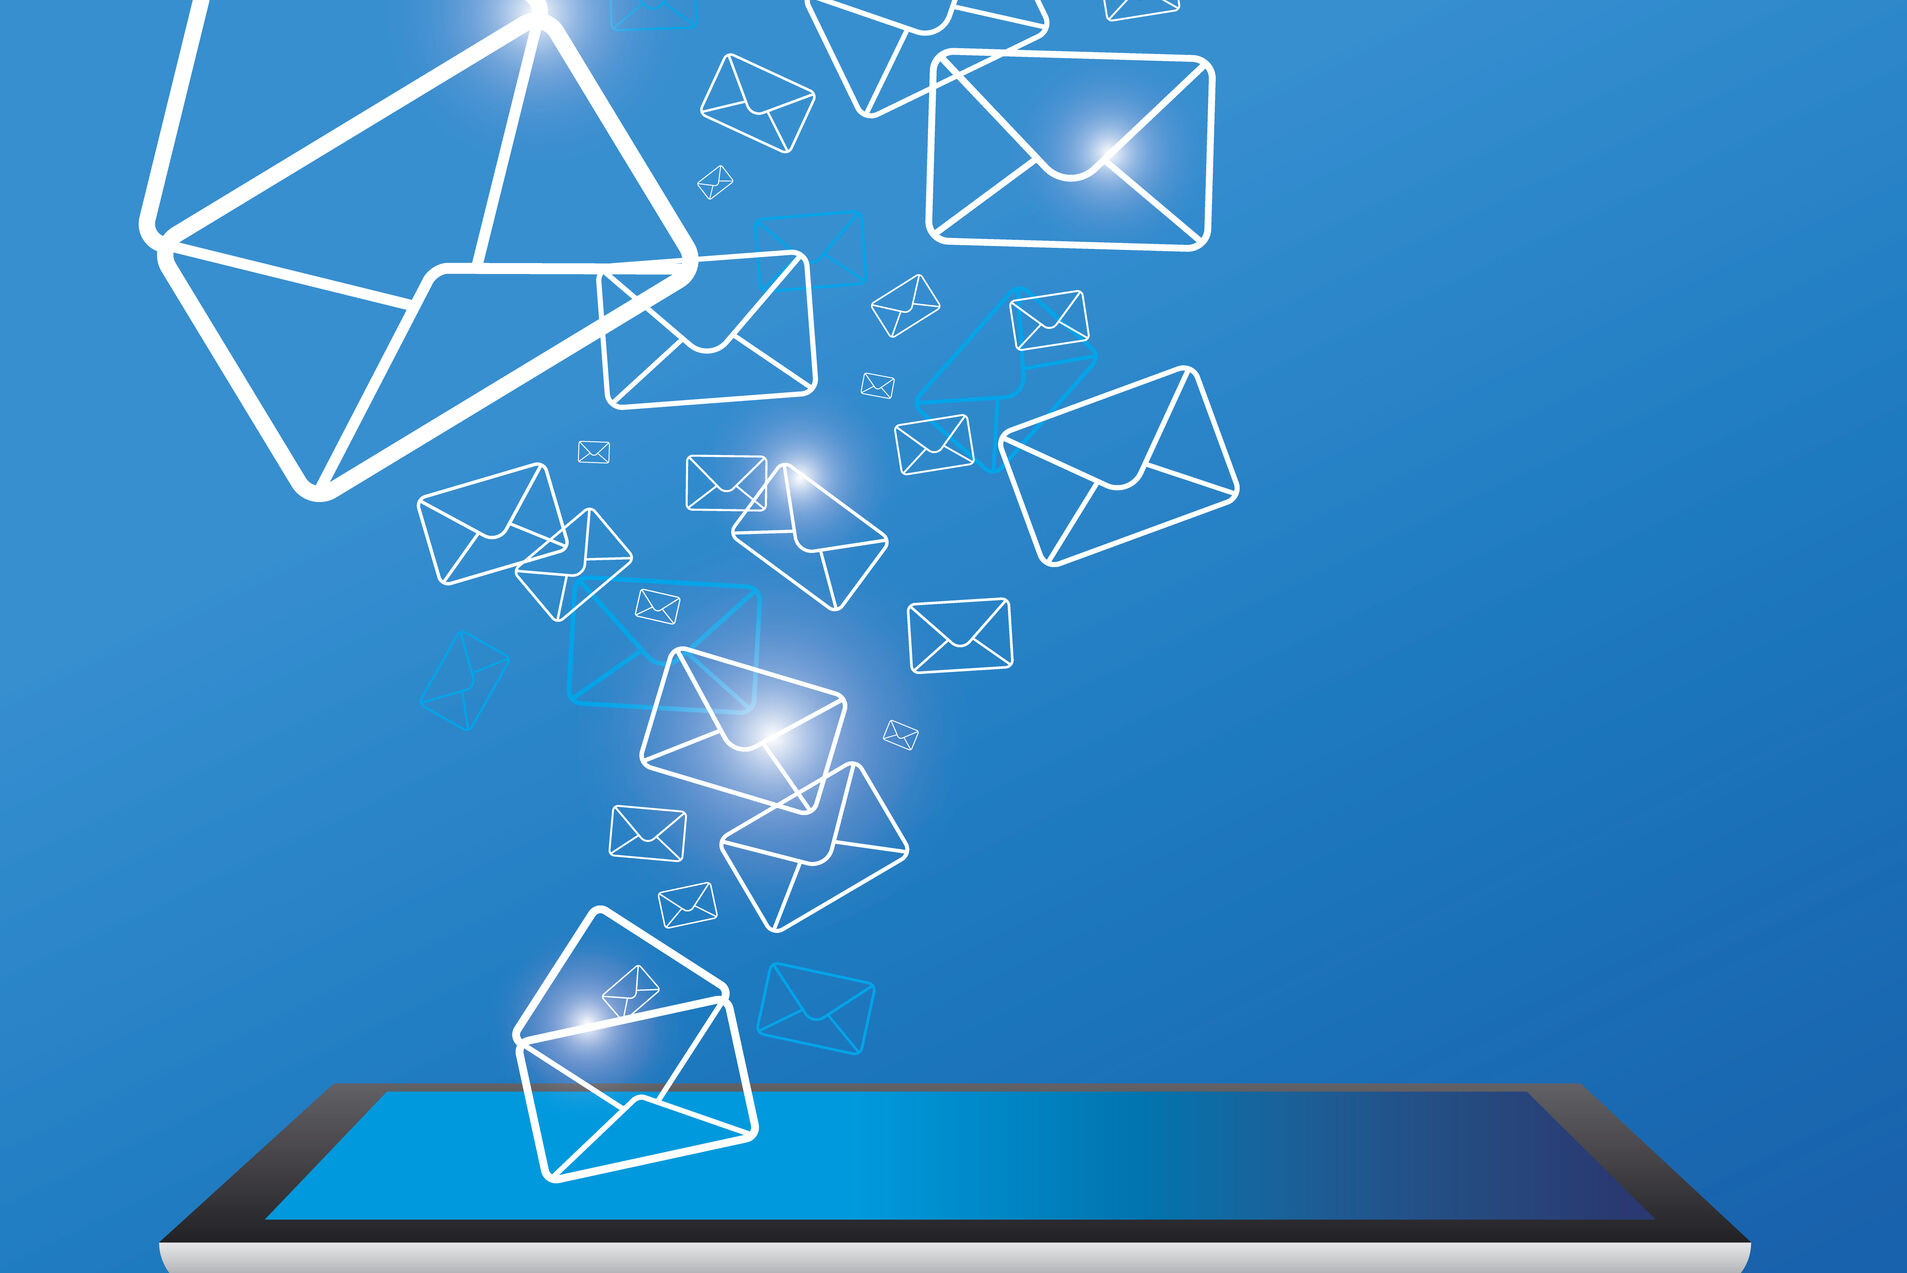 Email Marketing Newsletter ipad with email icons lifting off the surface